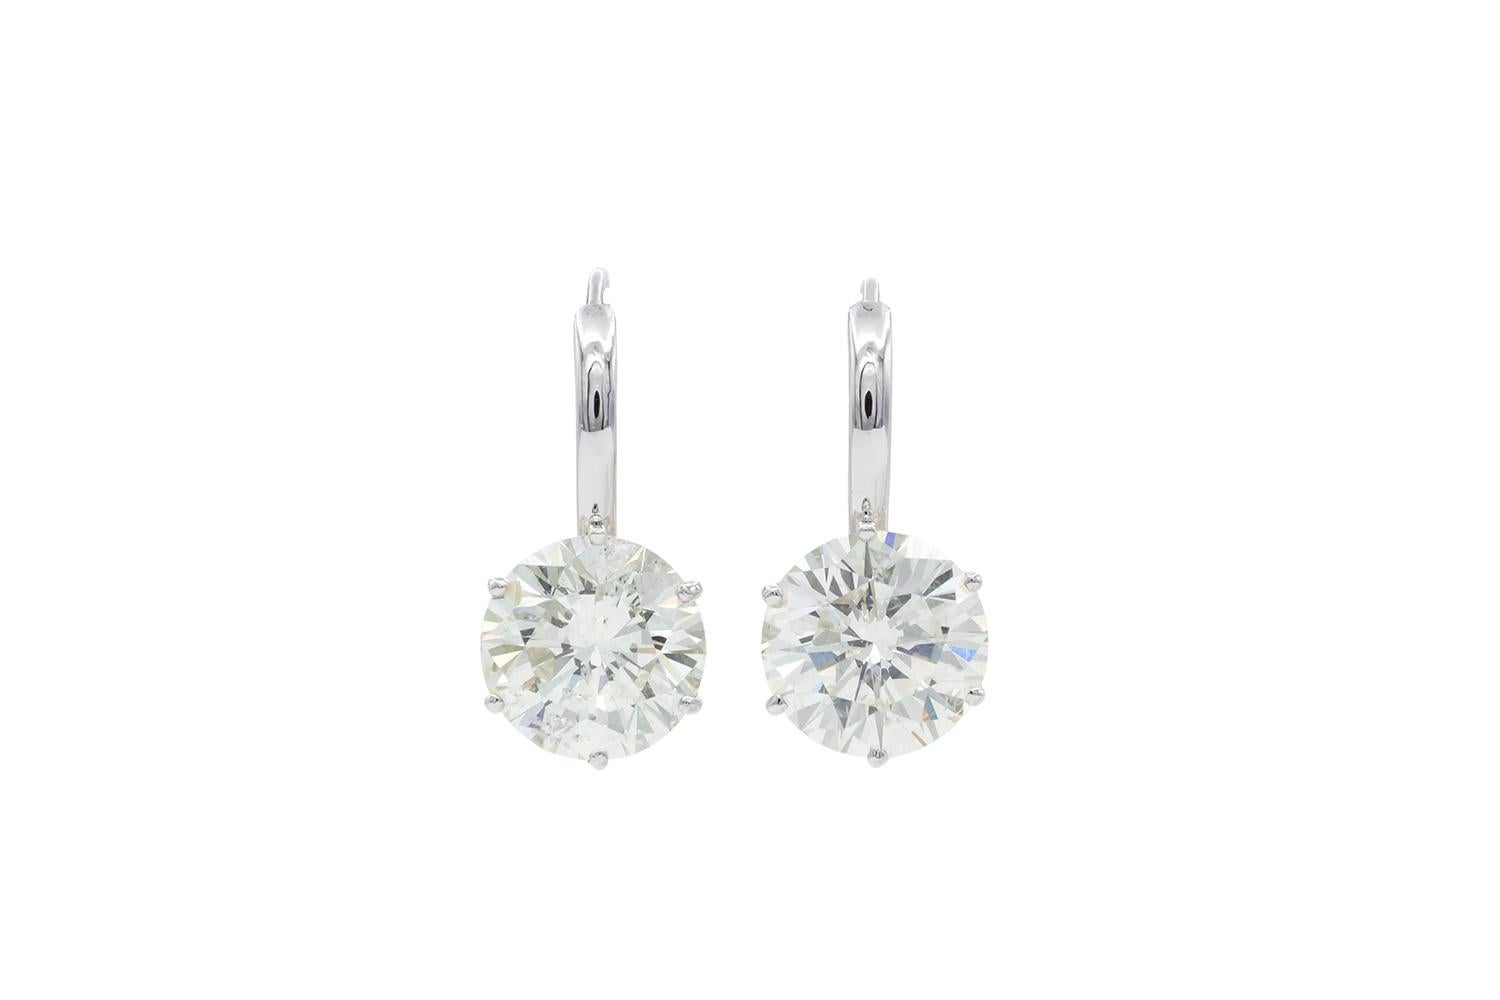 We are  pleased to present these EGL Certified Round Brilliant Cut Diamond & Platinum French Hook Solitaire Earrings. These truly stunning earrings are sure to make a statement! The two gorgeous natural round brilliant cut diamonds were just